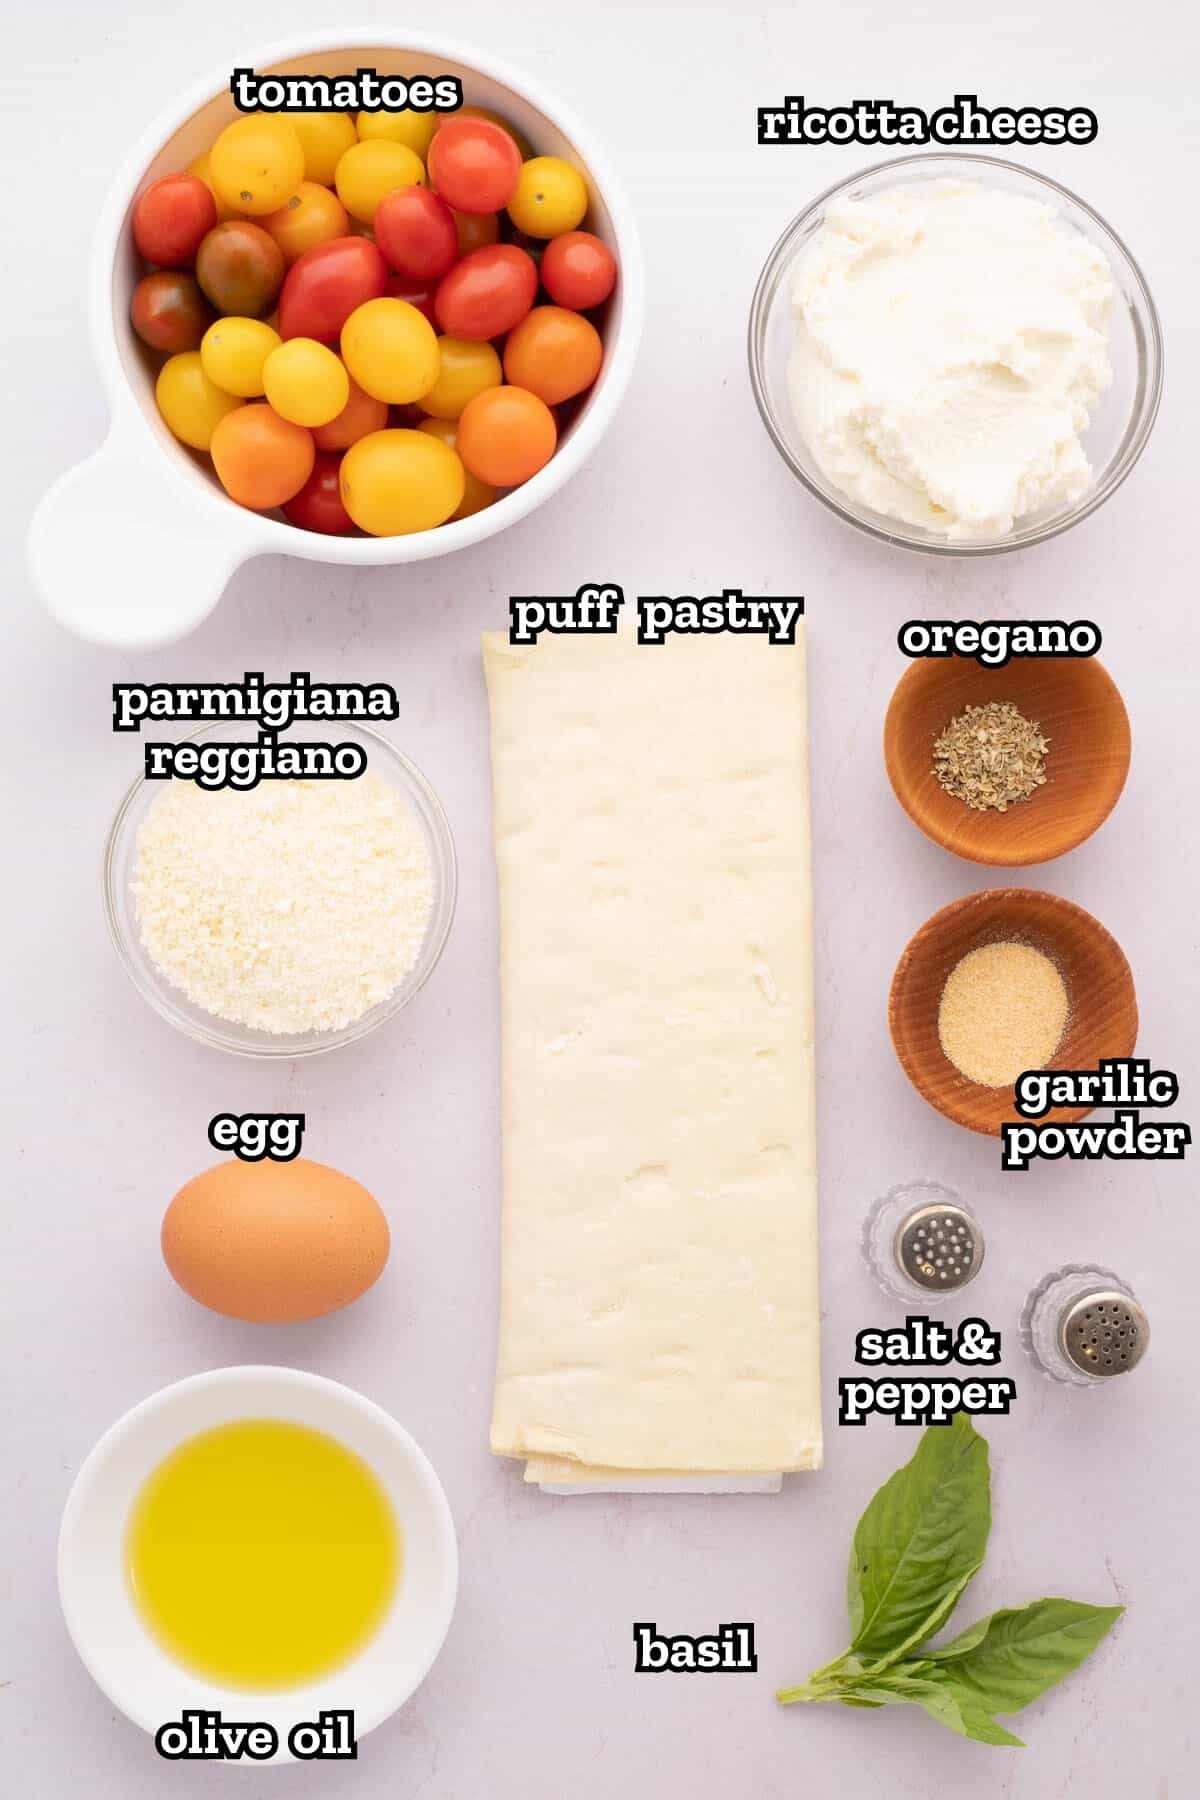 Labeled ingredients needed to make a tomato tart with puff pastry.